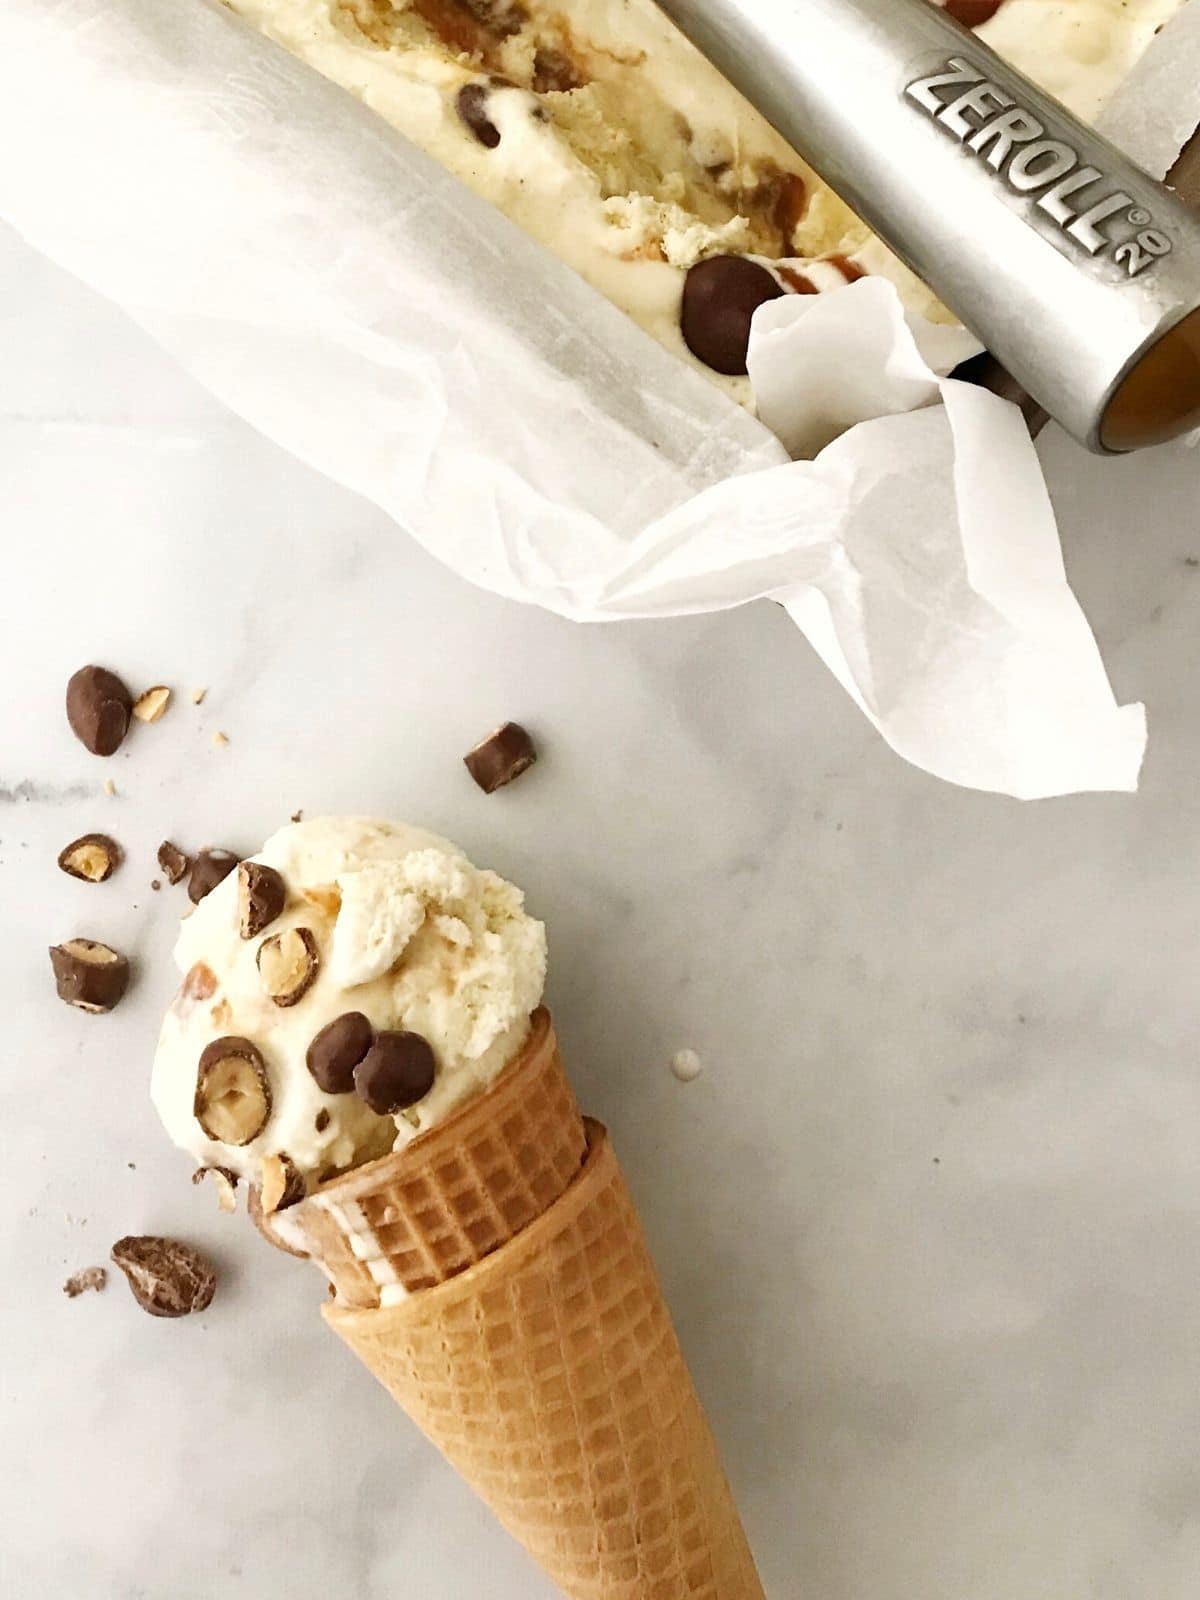 ice cream cone sprinkled with peanuts